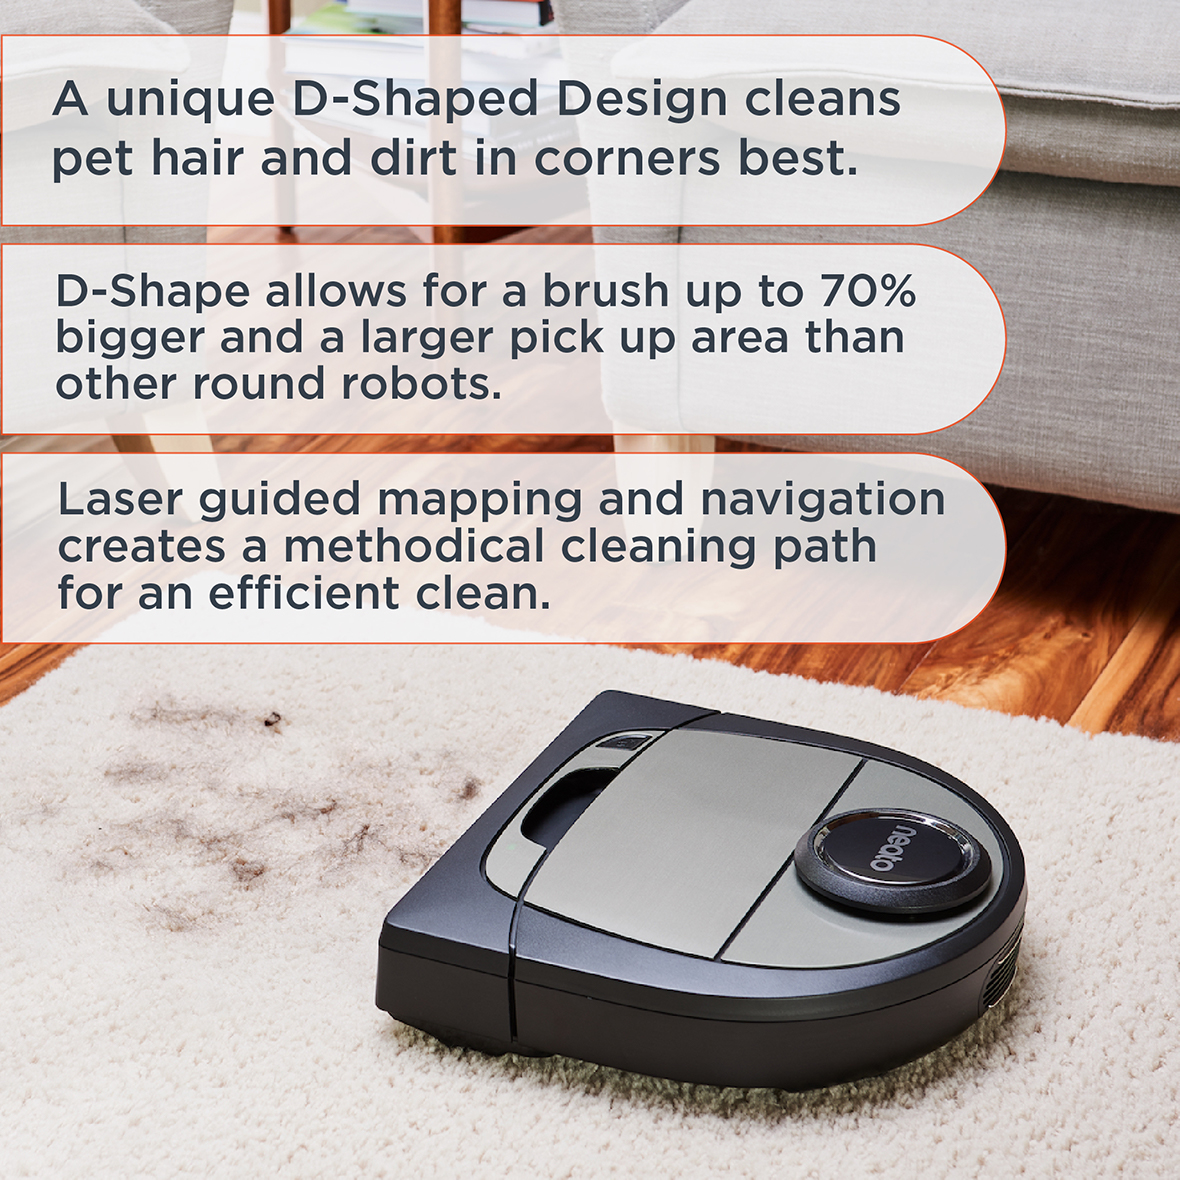 Neato Robotics Botvac D7 Wi-Fi Connected Robot Vacuum with Multi-floor Plan Mapping - image 3 of 8